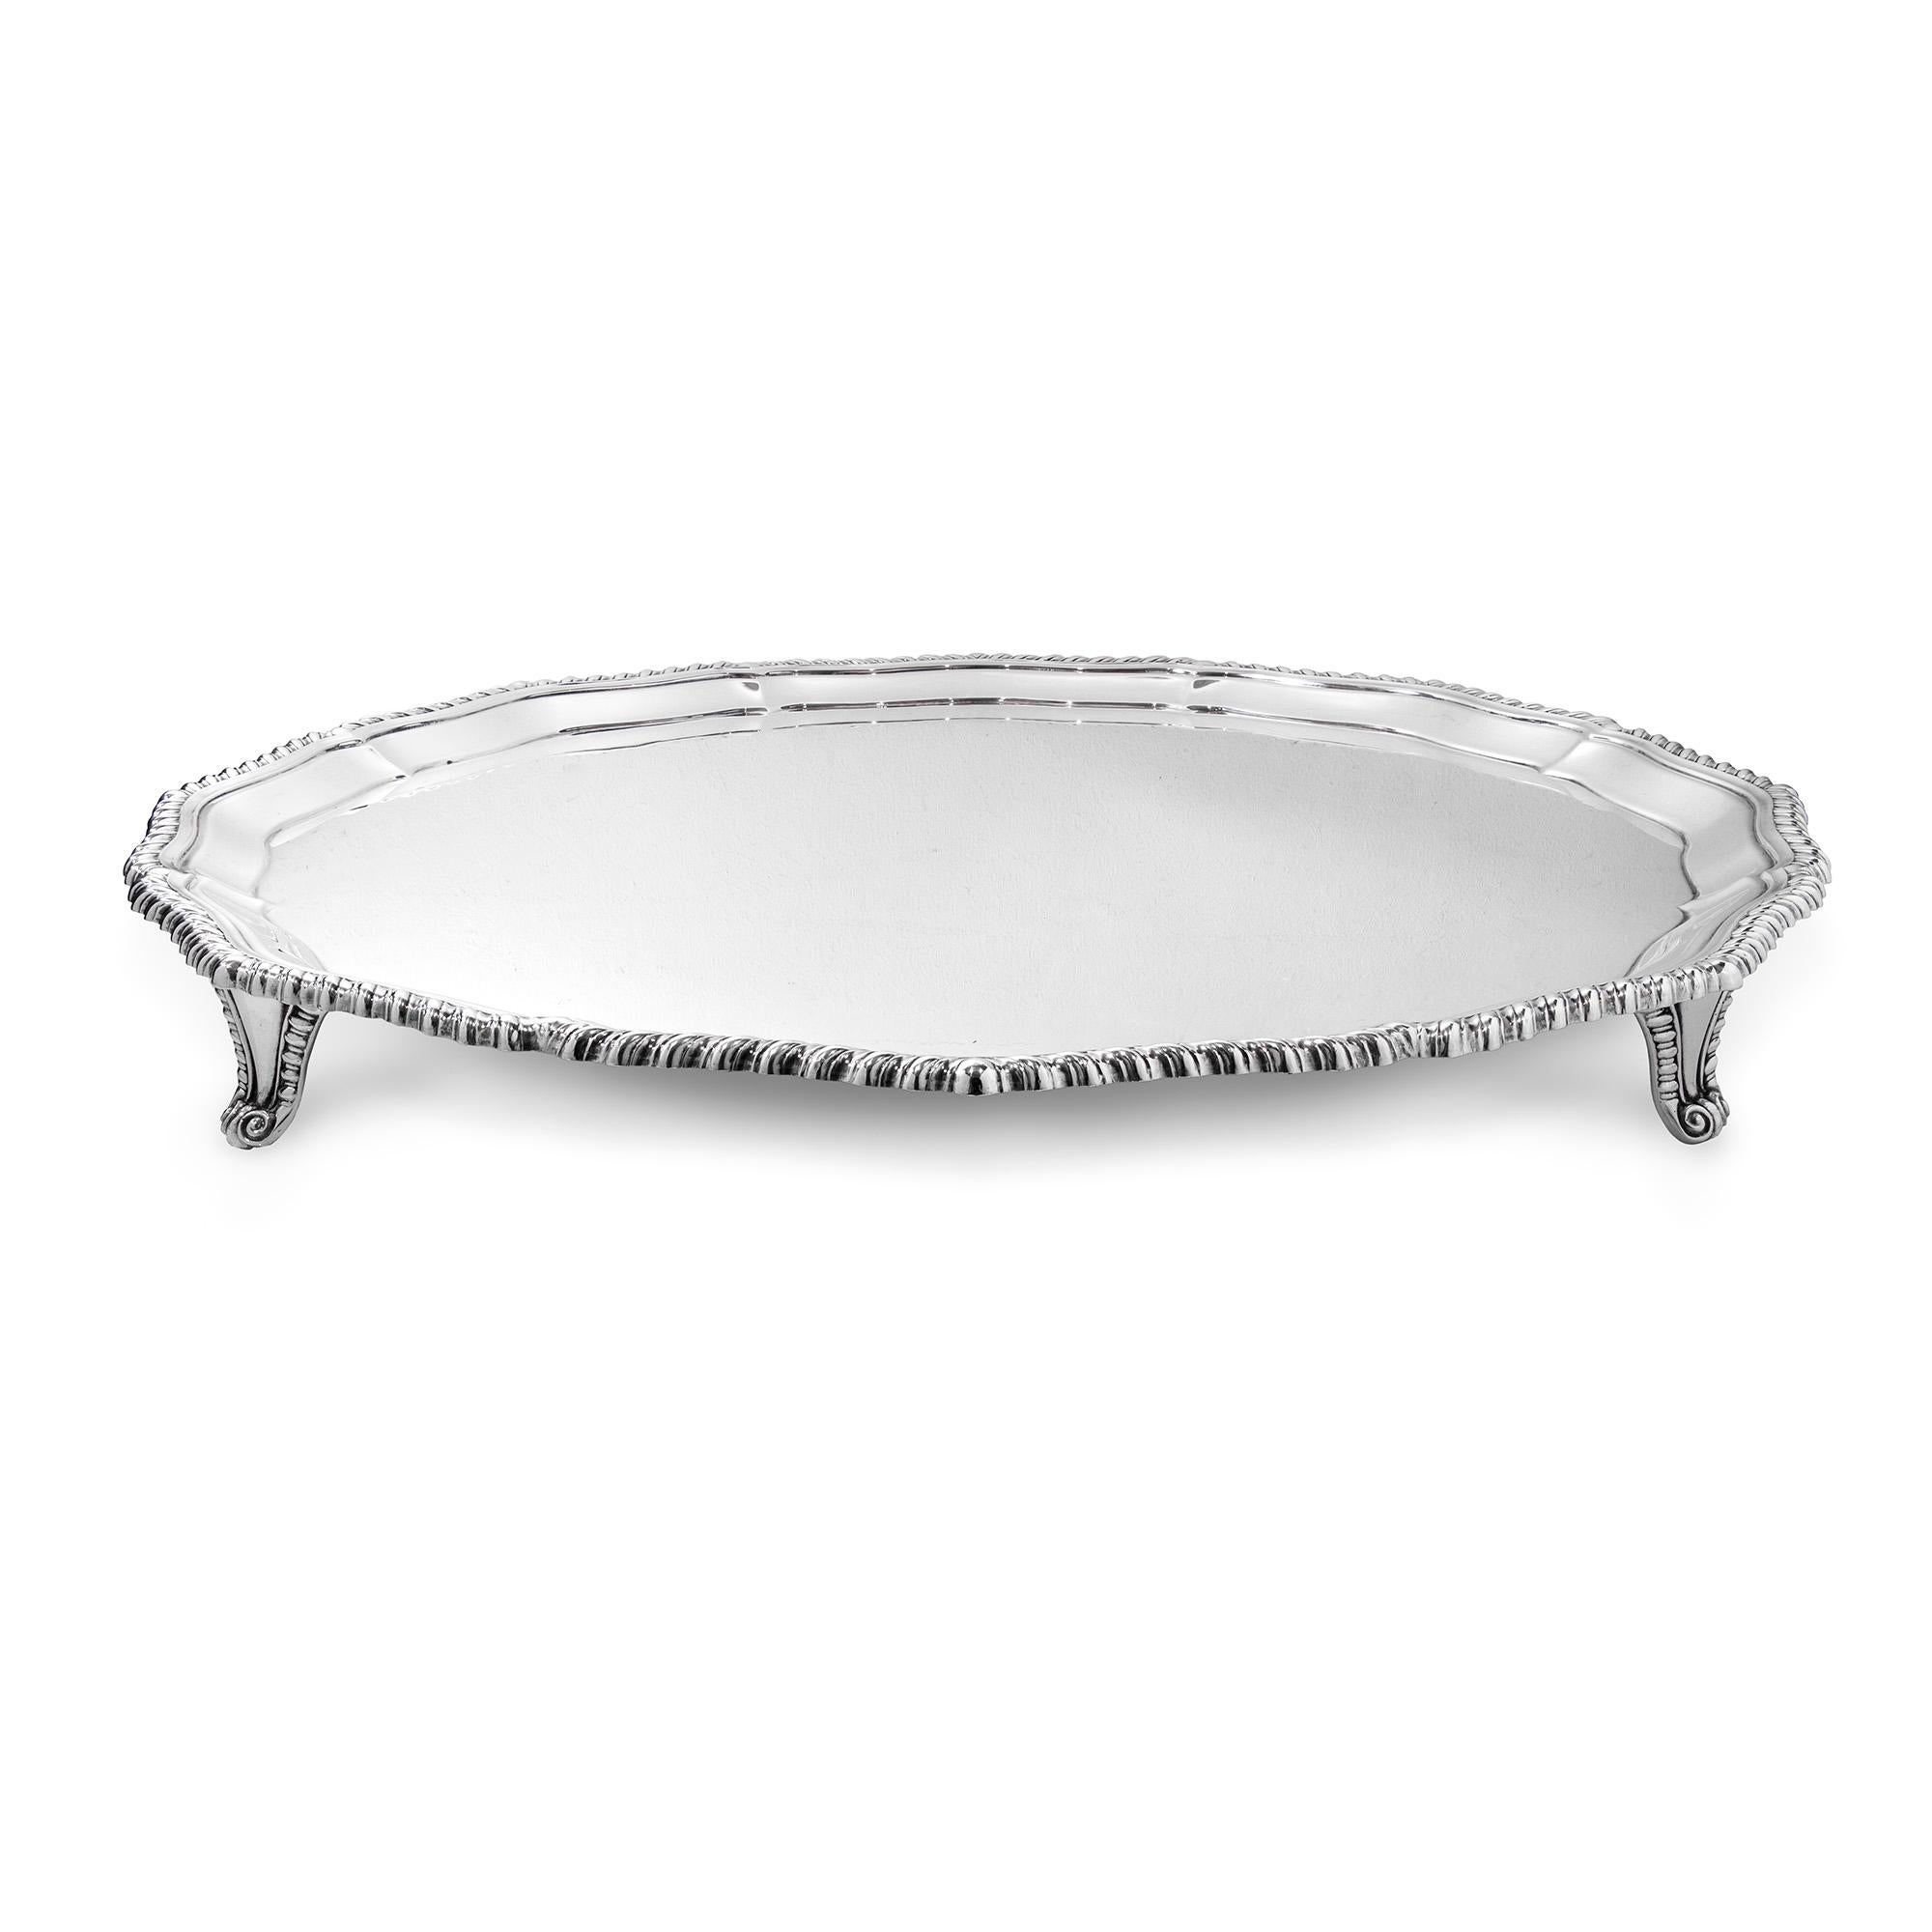 A sterling silver circular shaped salver, with applied gadroon mount, on four scroll bracket feet, 42.5cm in diameter, gross weight 67.5ozs, hallmarked Sheffield 1933, maker Stevenson & Law. 

Should you choose to make this purchase we would be